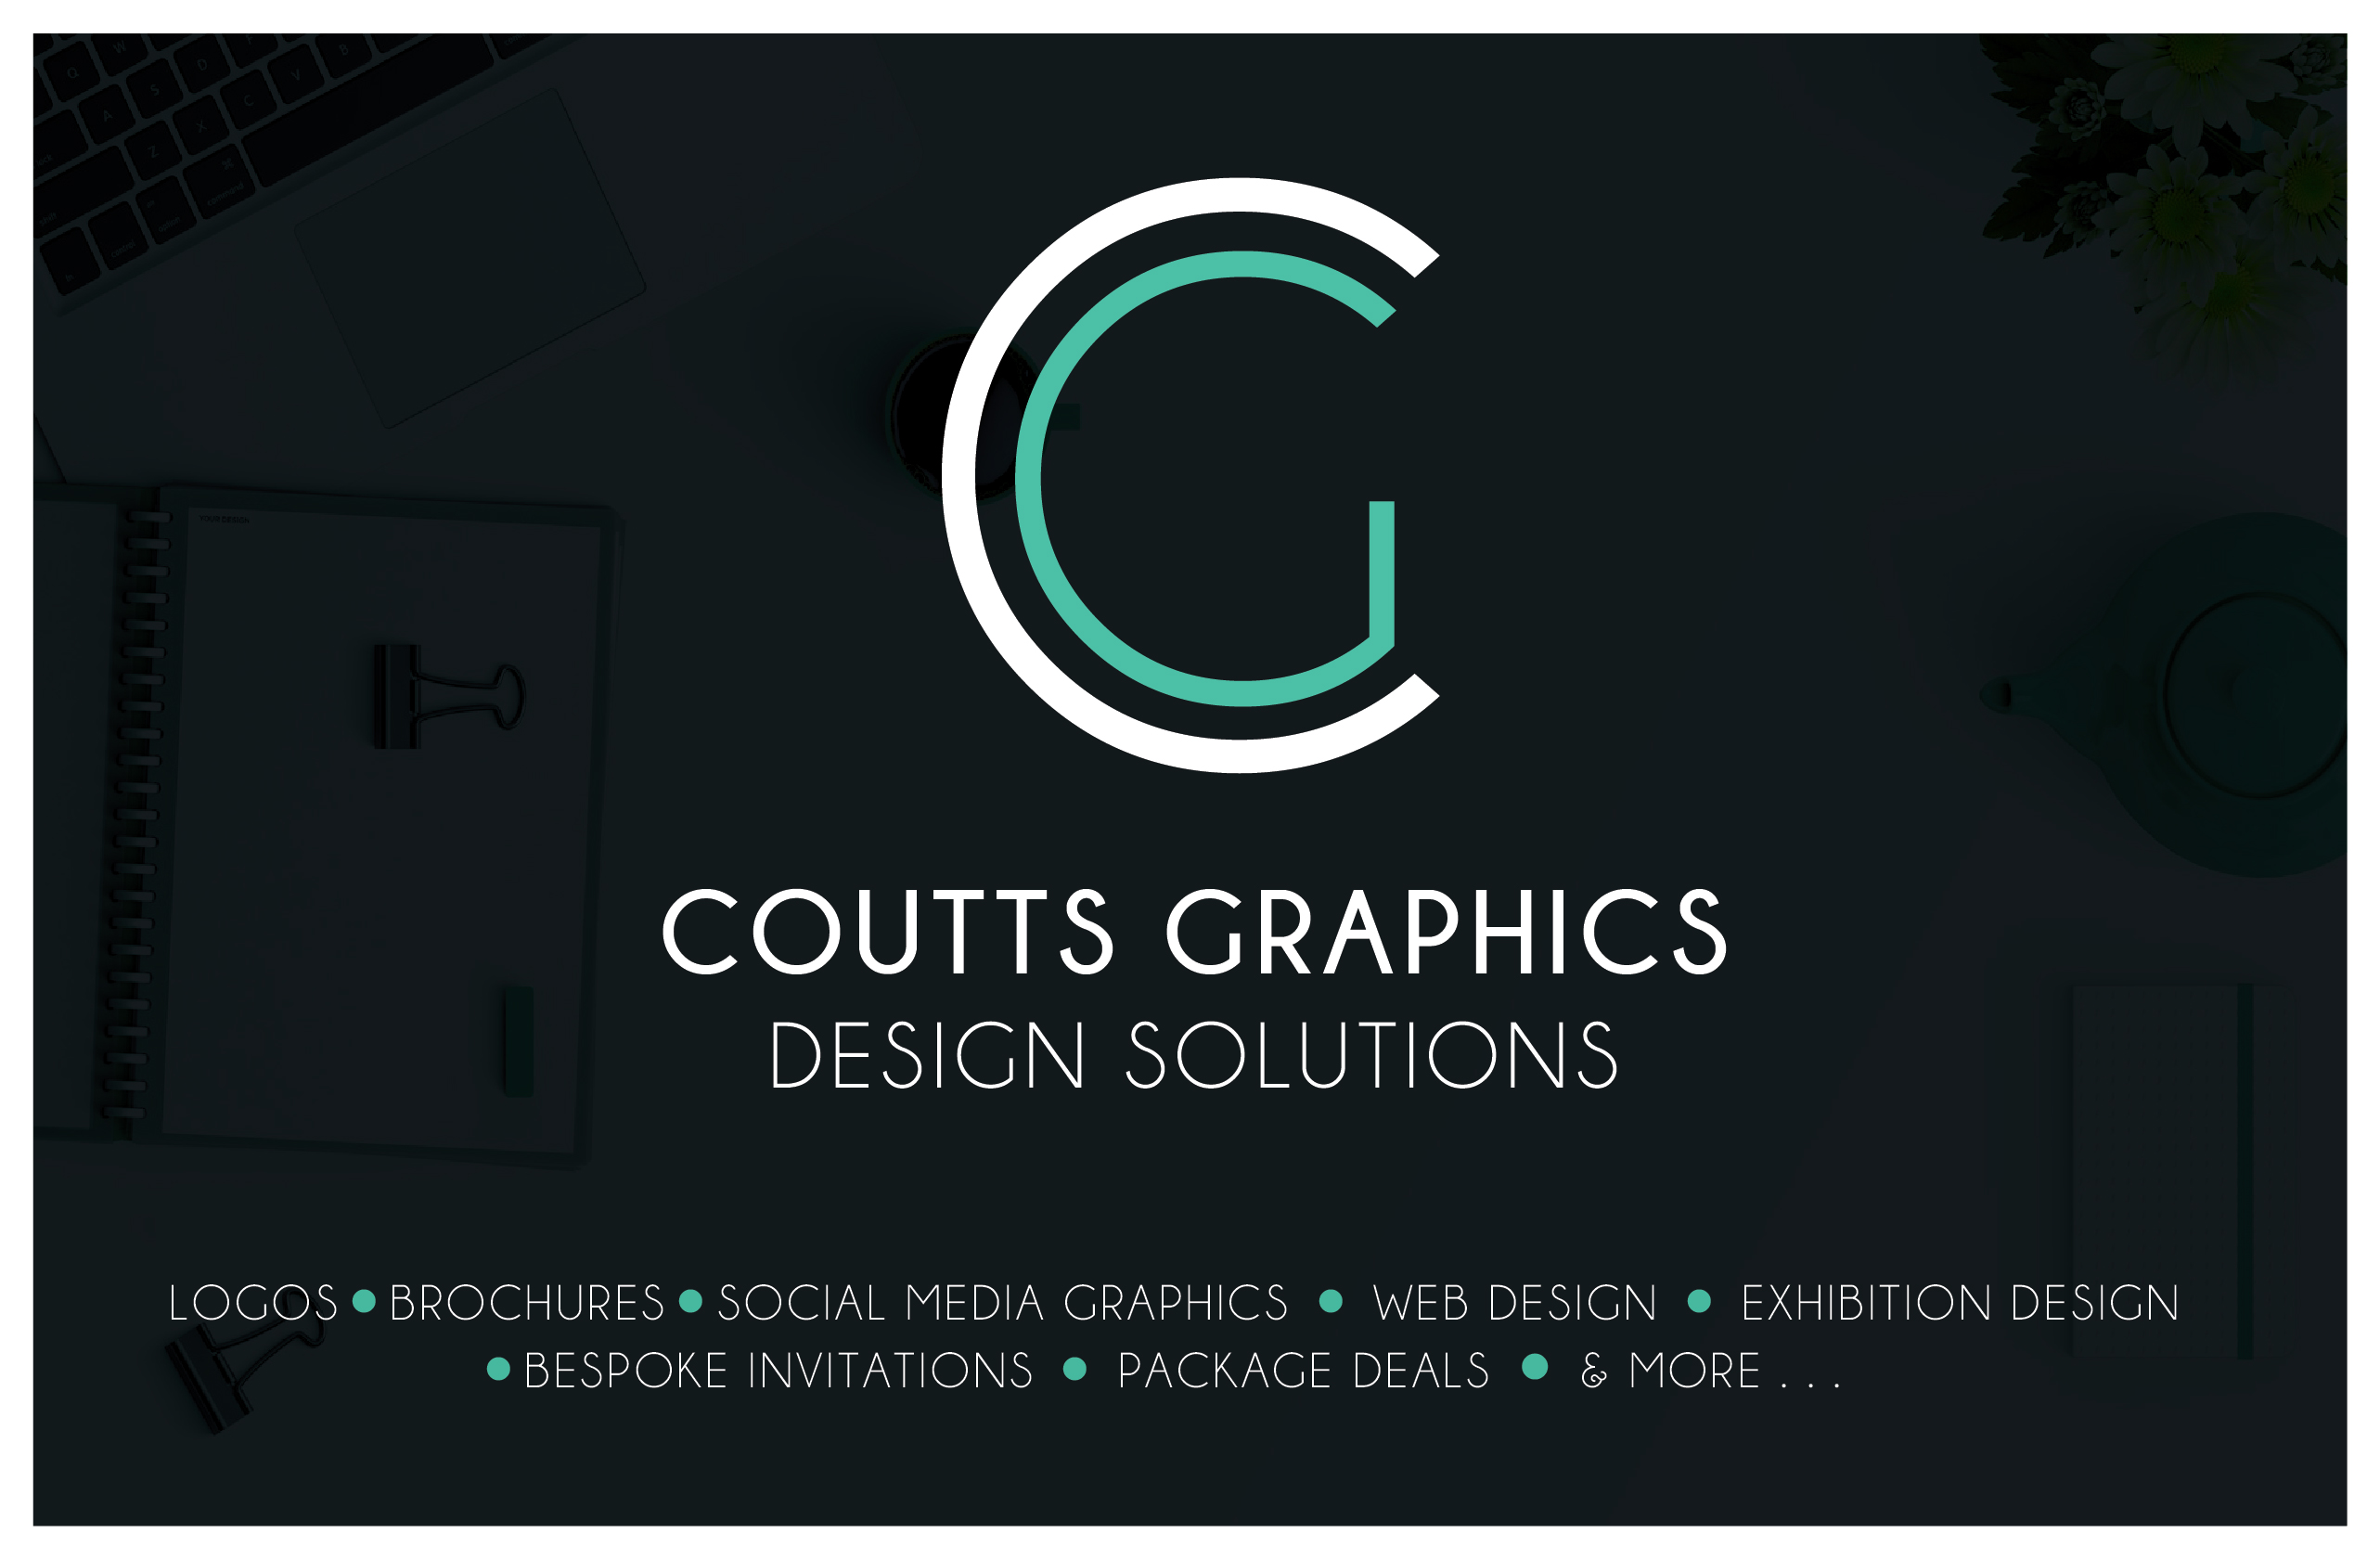 COUTTS GRAPHICS
DESICN SOLUTIONS

LOCOS @ BROCHURES ® SOCIAL MEDIA GRAPHICS ® WEB DESICN e EXHIBITION DESIGN
® BESPOKE INVITATIONS ® PACKAGE DEALS ® &amp; MORE . ..